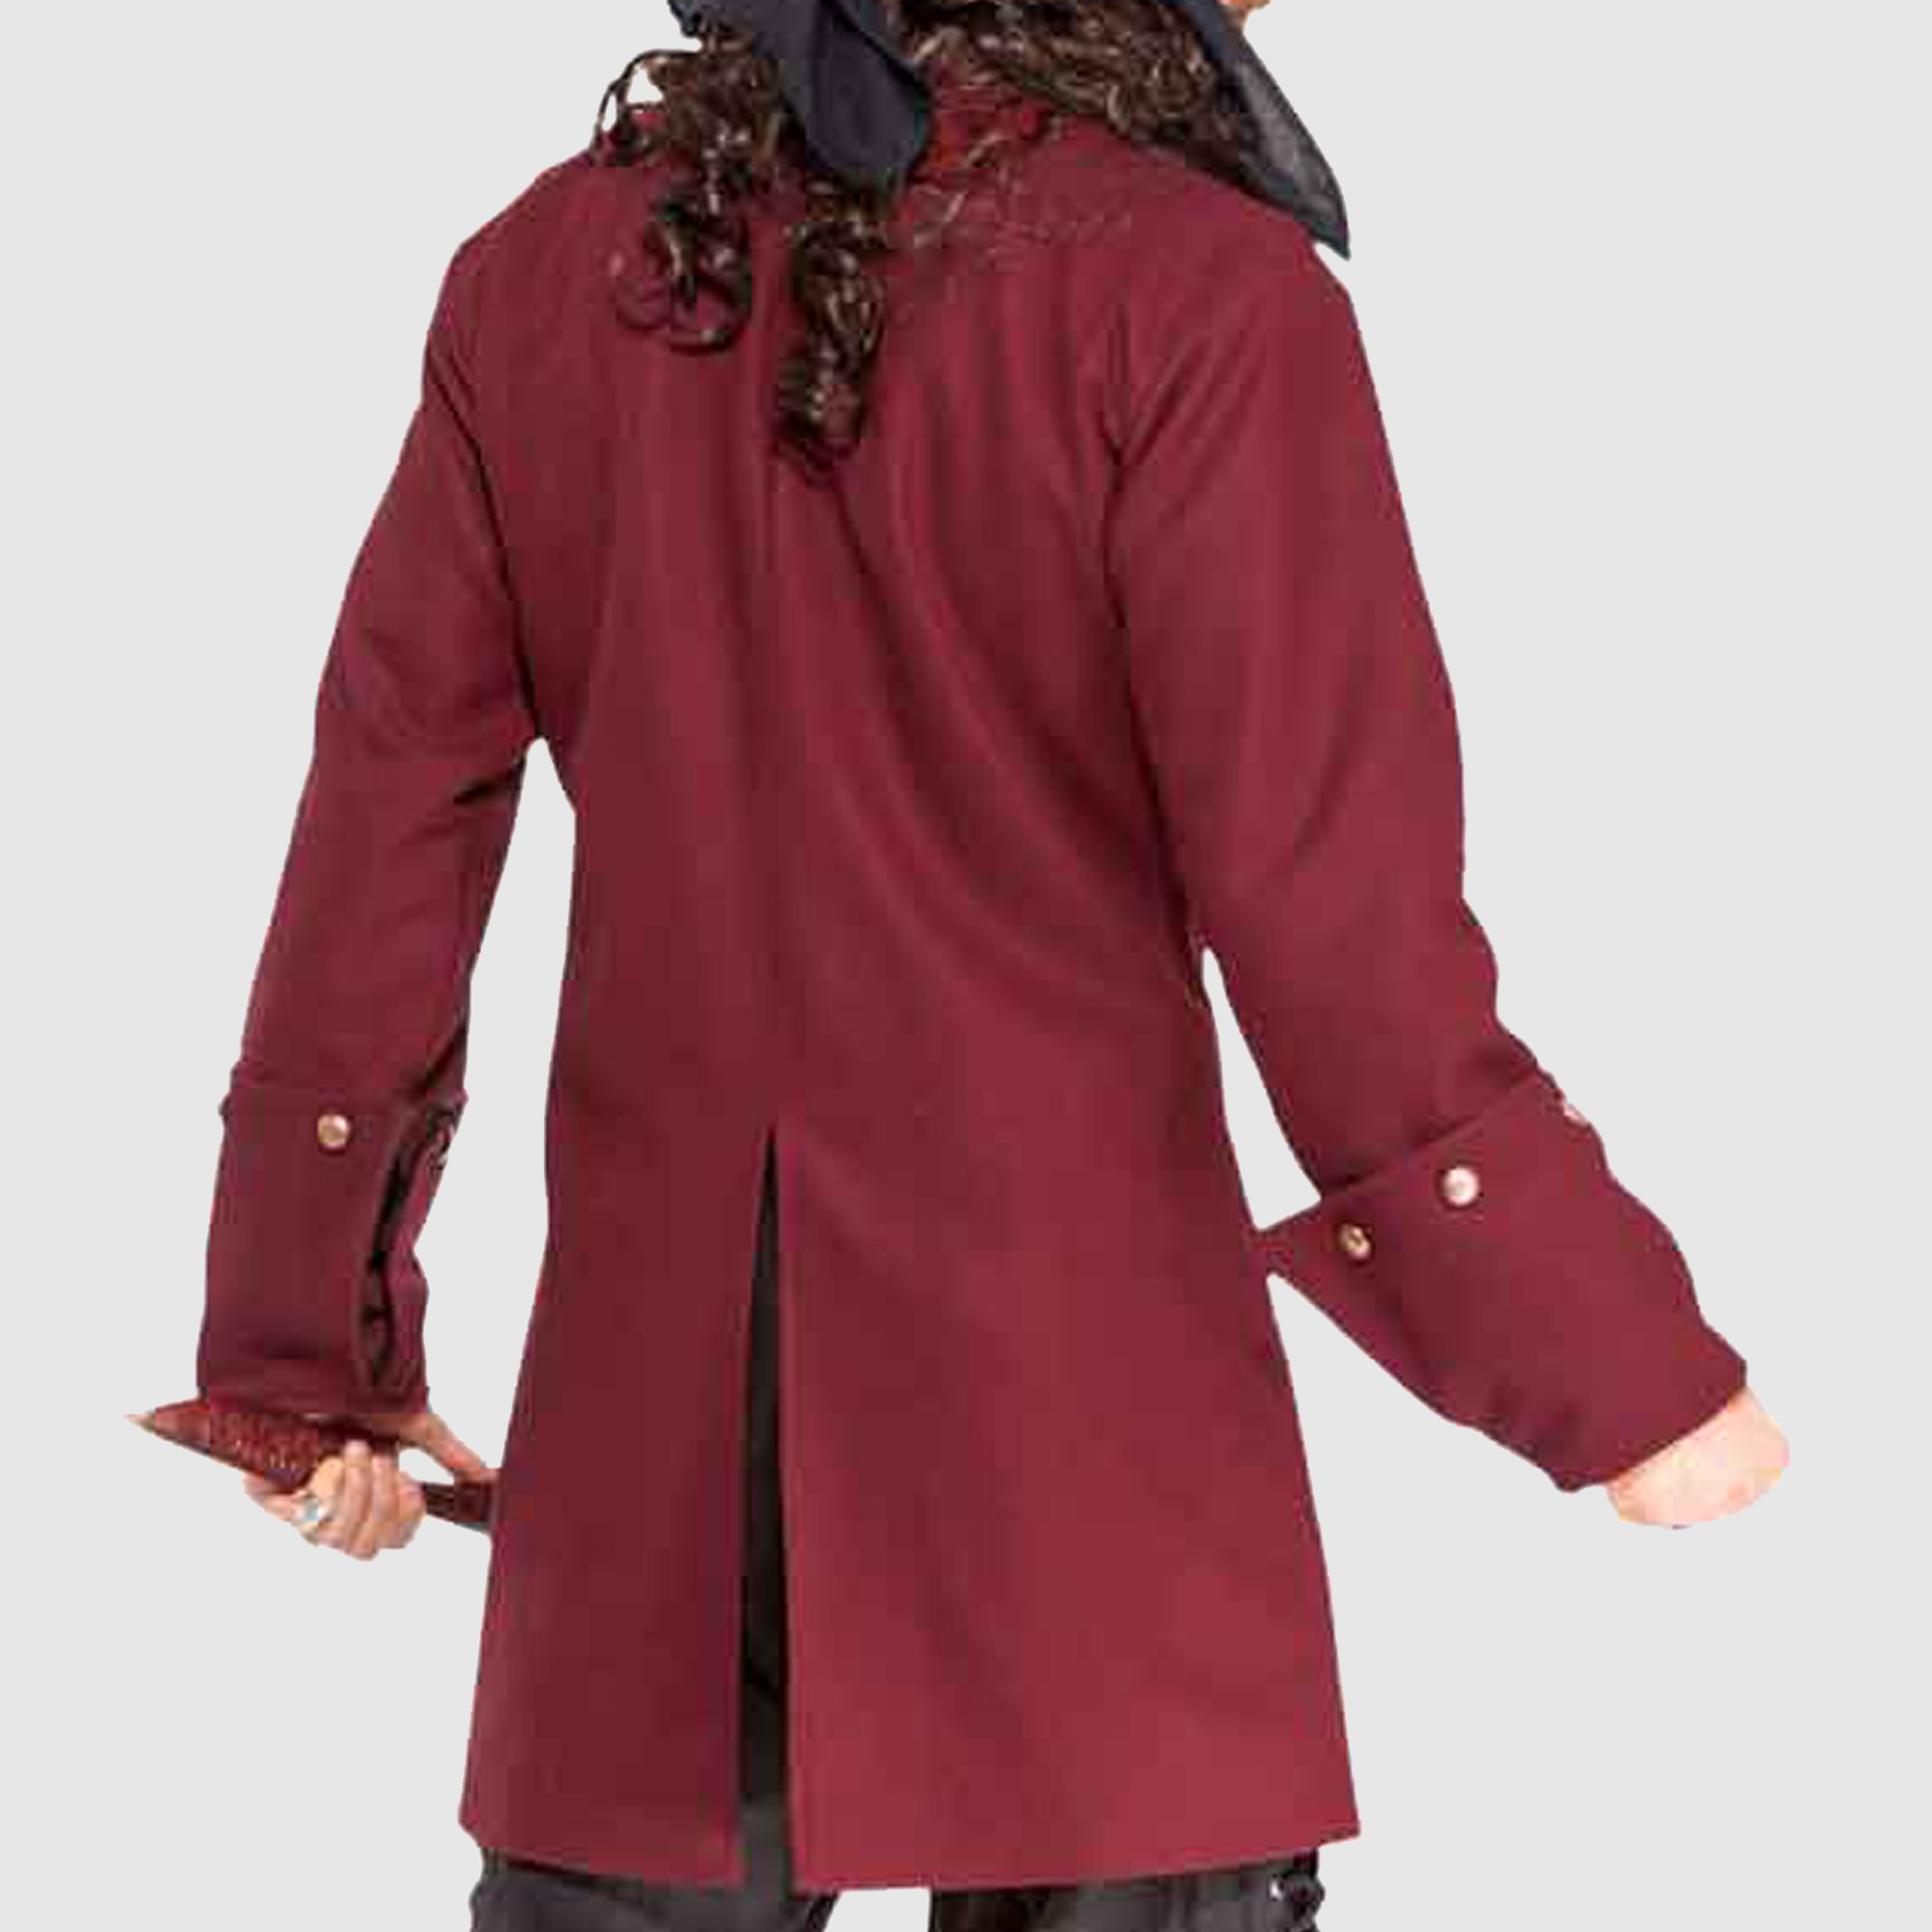 17th century pirates of Caribbean large coat with sleeves for men's